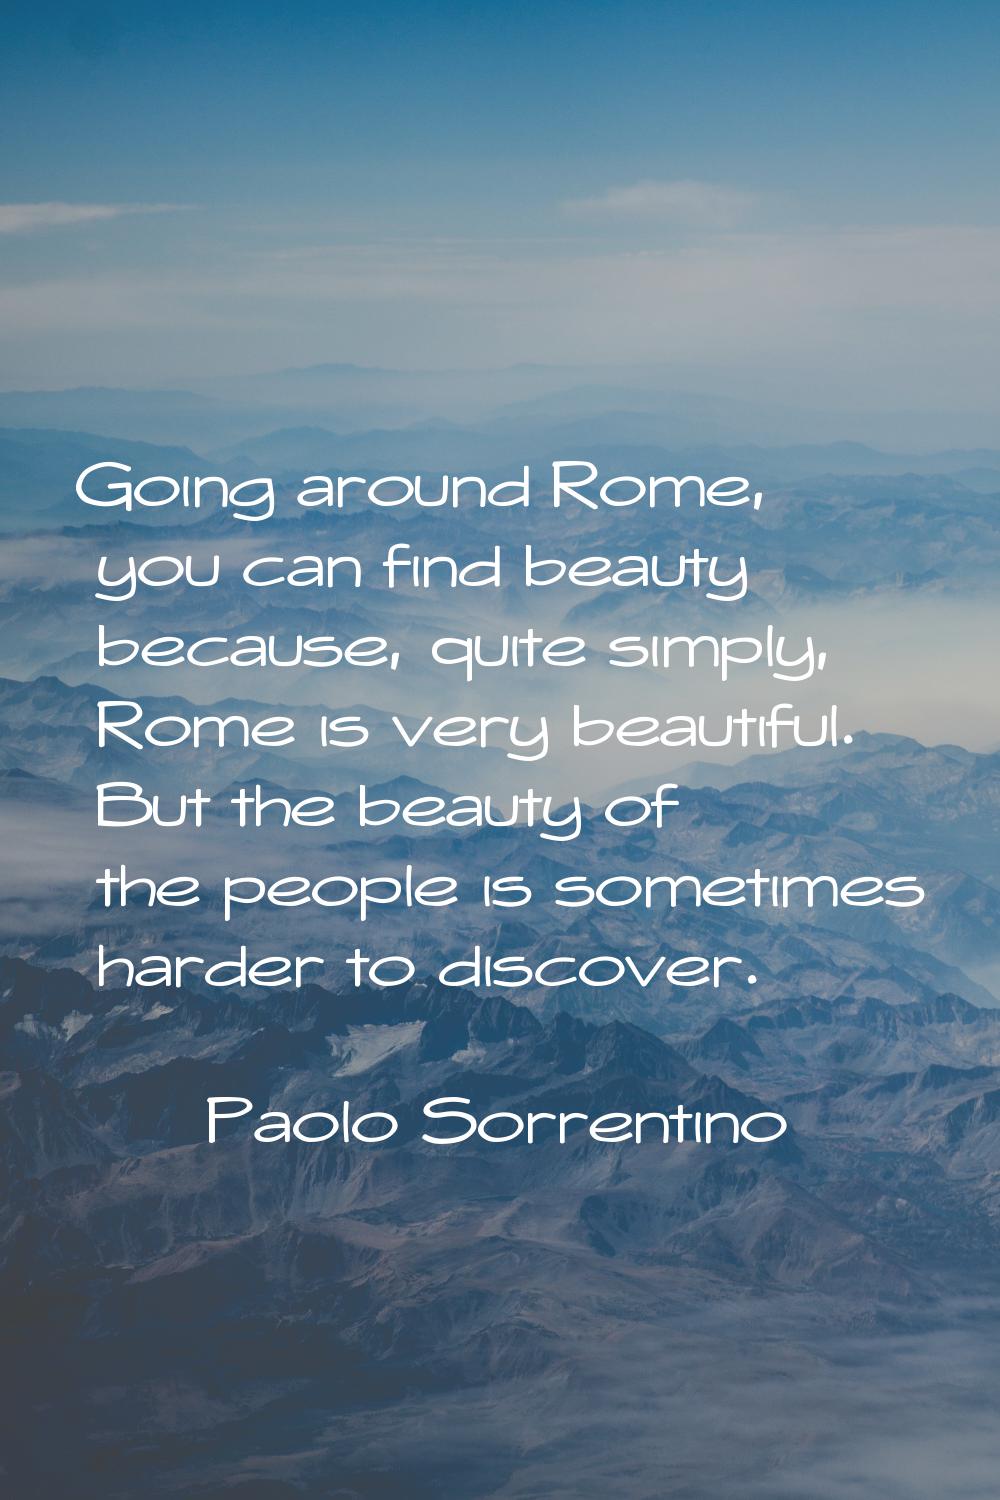 Going around Rome, you can find beauty because, quite simply, Rome is very beautiful. But the beaut